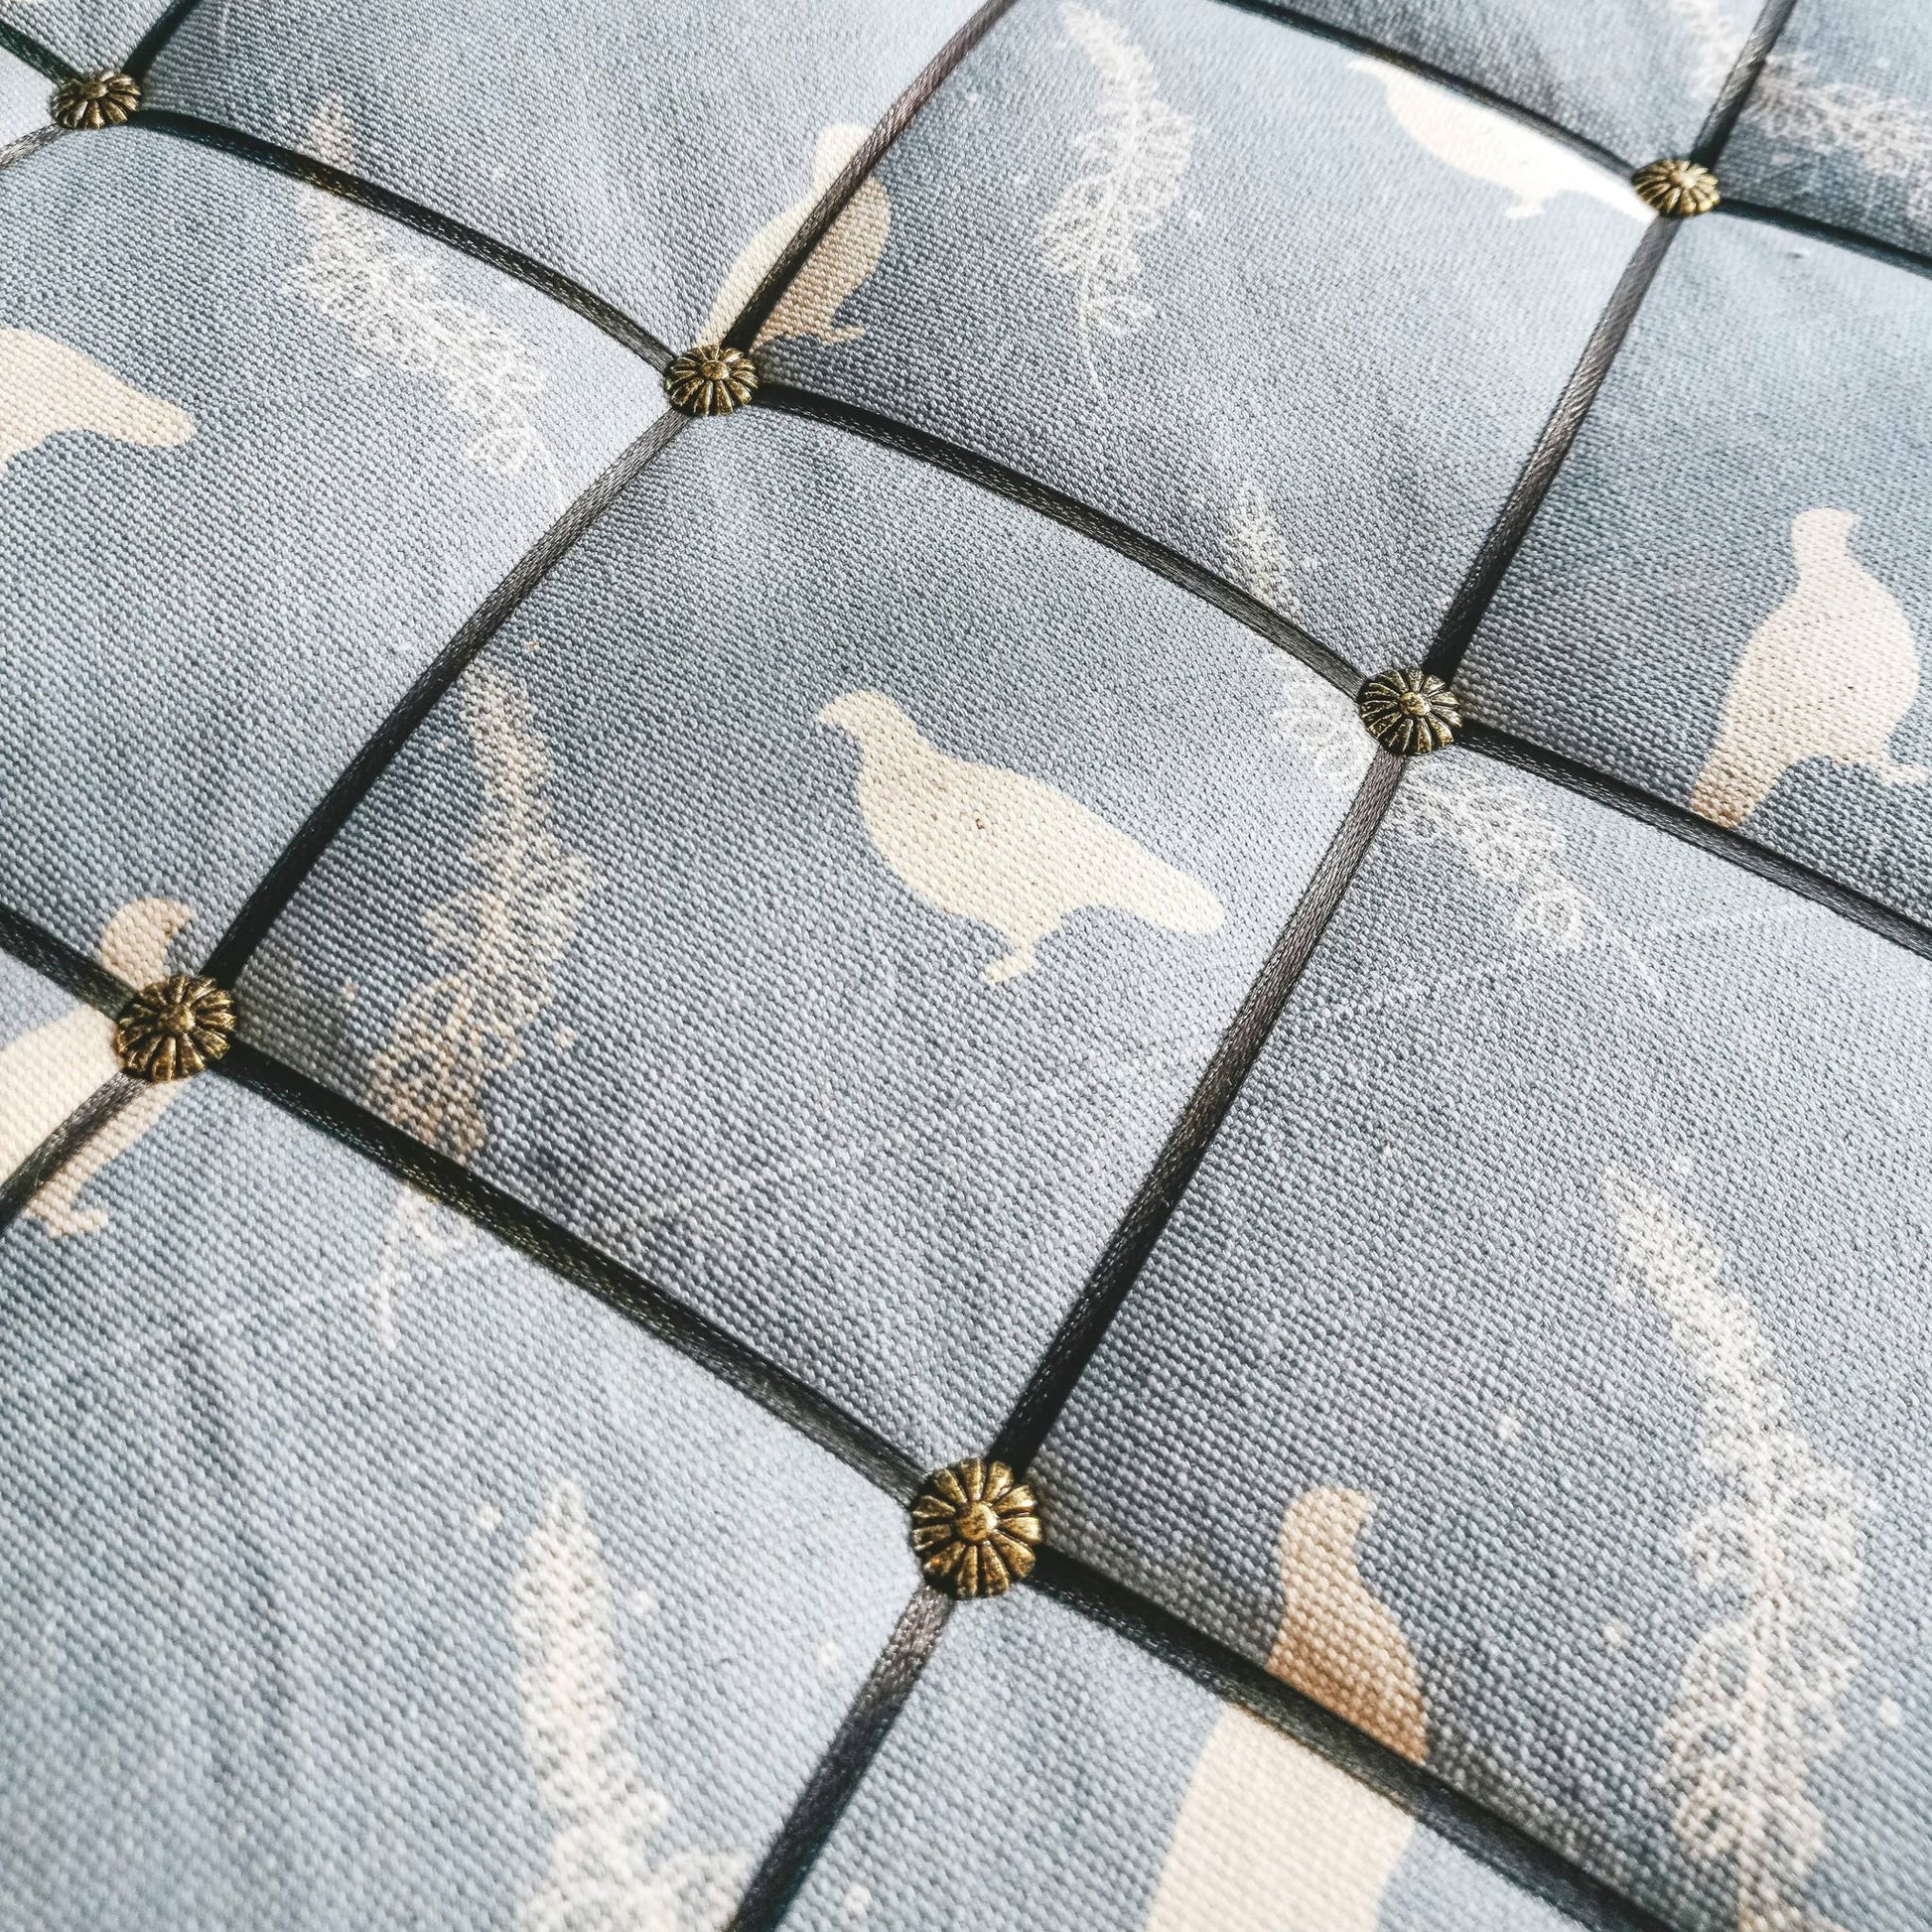 padded grouse print memo board in blue handmade in yorkshire designed and made by F&B